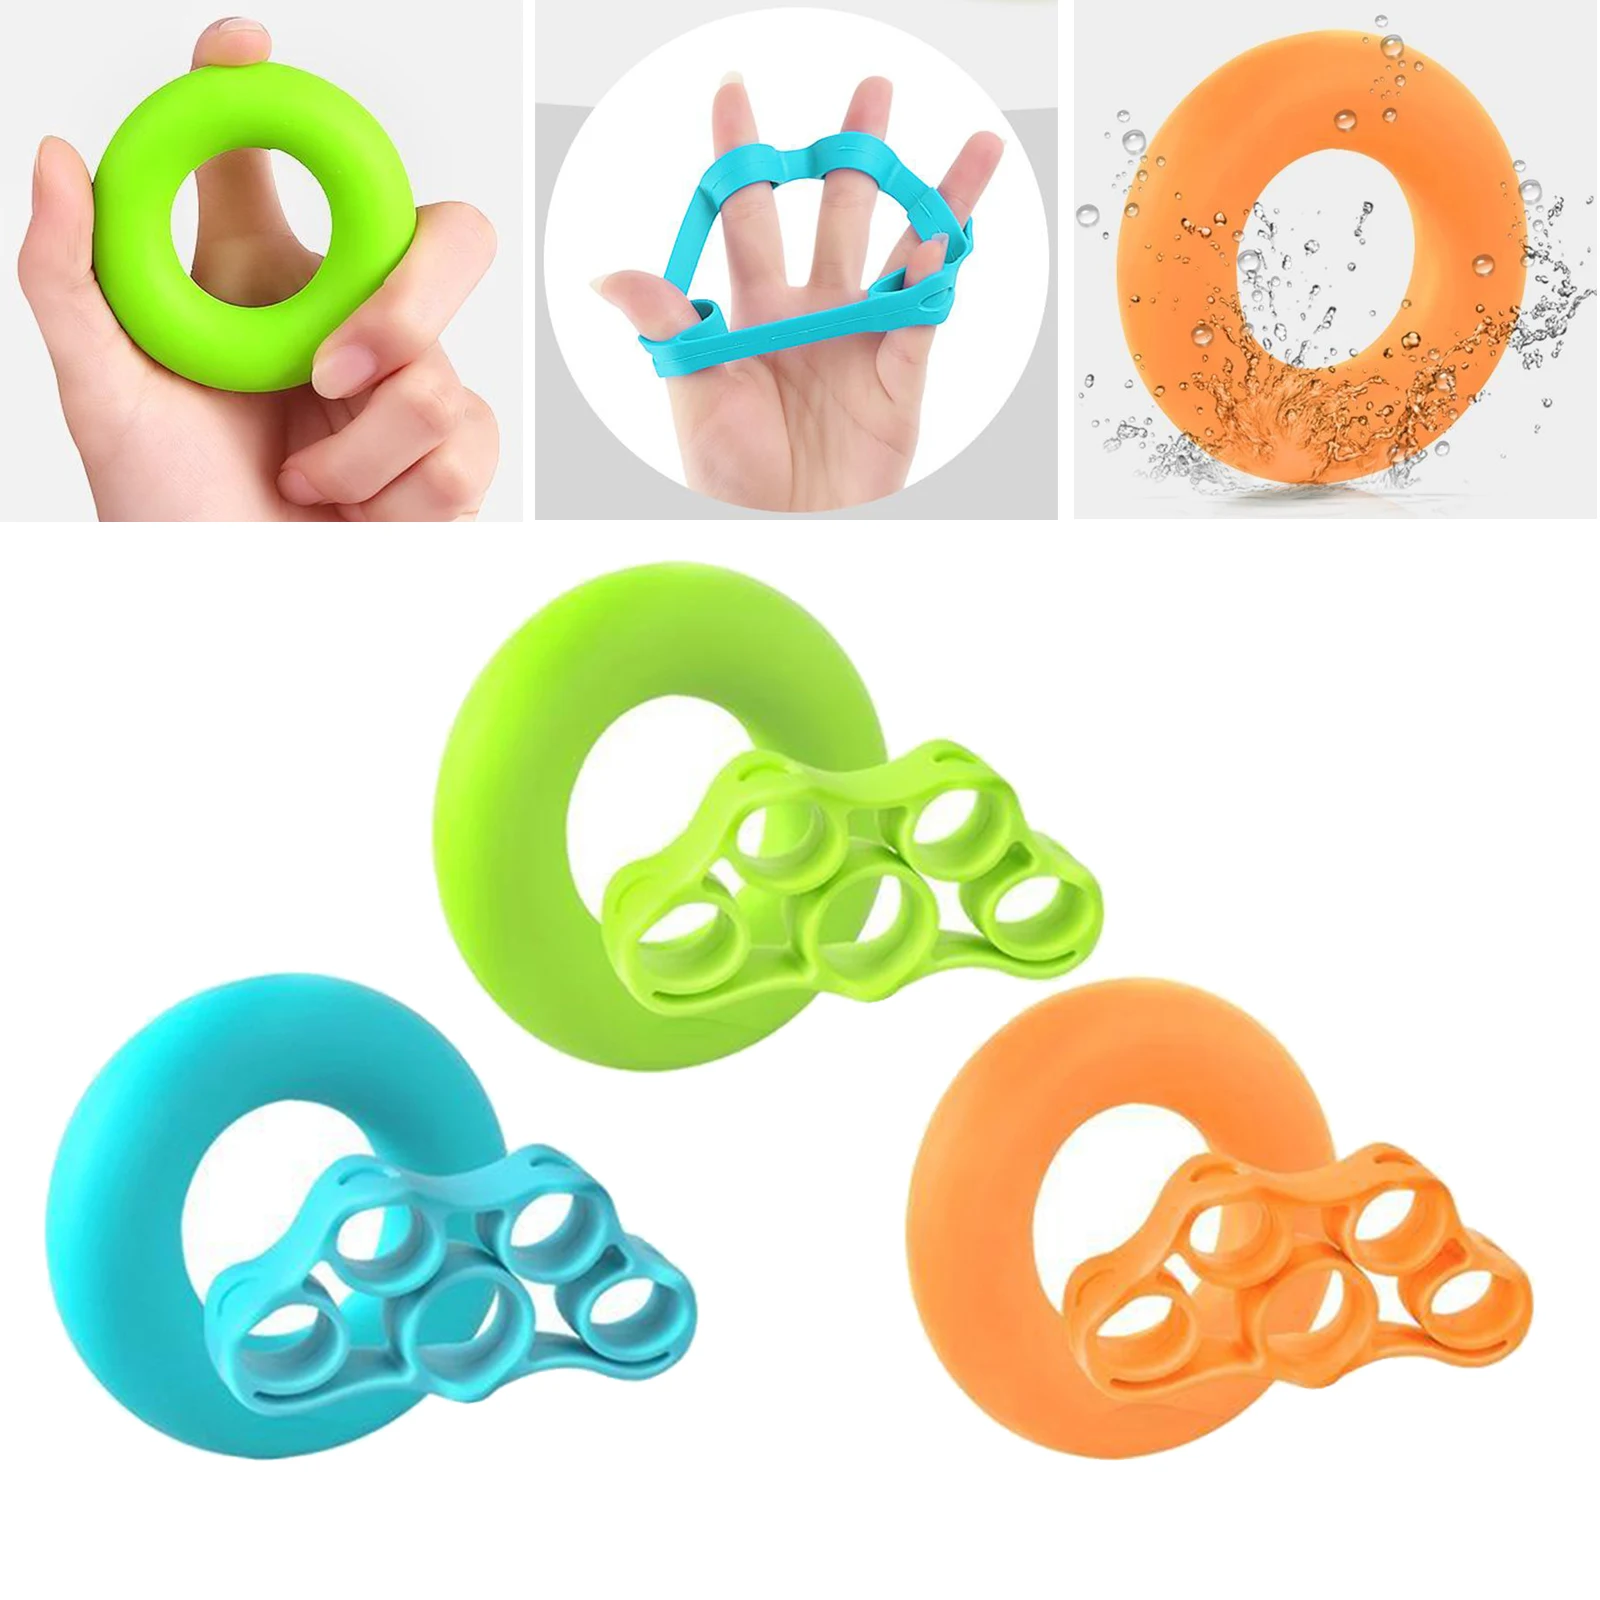 Finger Strengtheners Hand Grip Ring Workout Kit 6 Pack Finger Hand Exerciser Strength Extensor Trainer 3 Resistance Levels Easy Medium Heavy Increase Strength Improve Dexterity Relieve Wrist Pain 